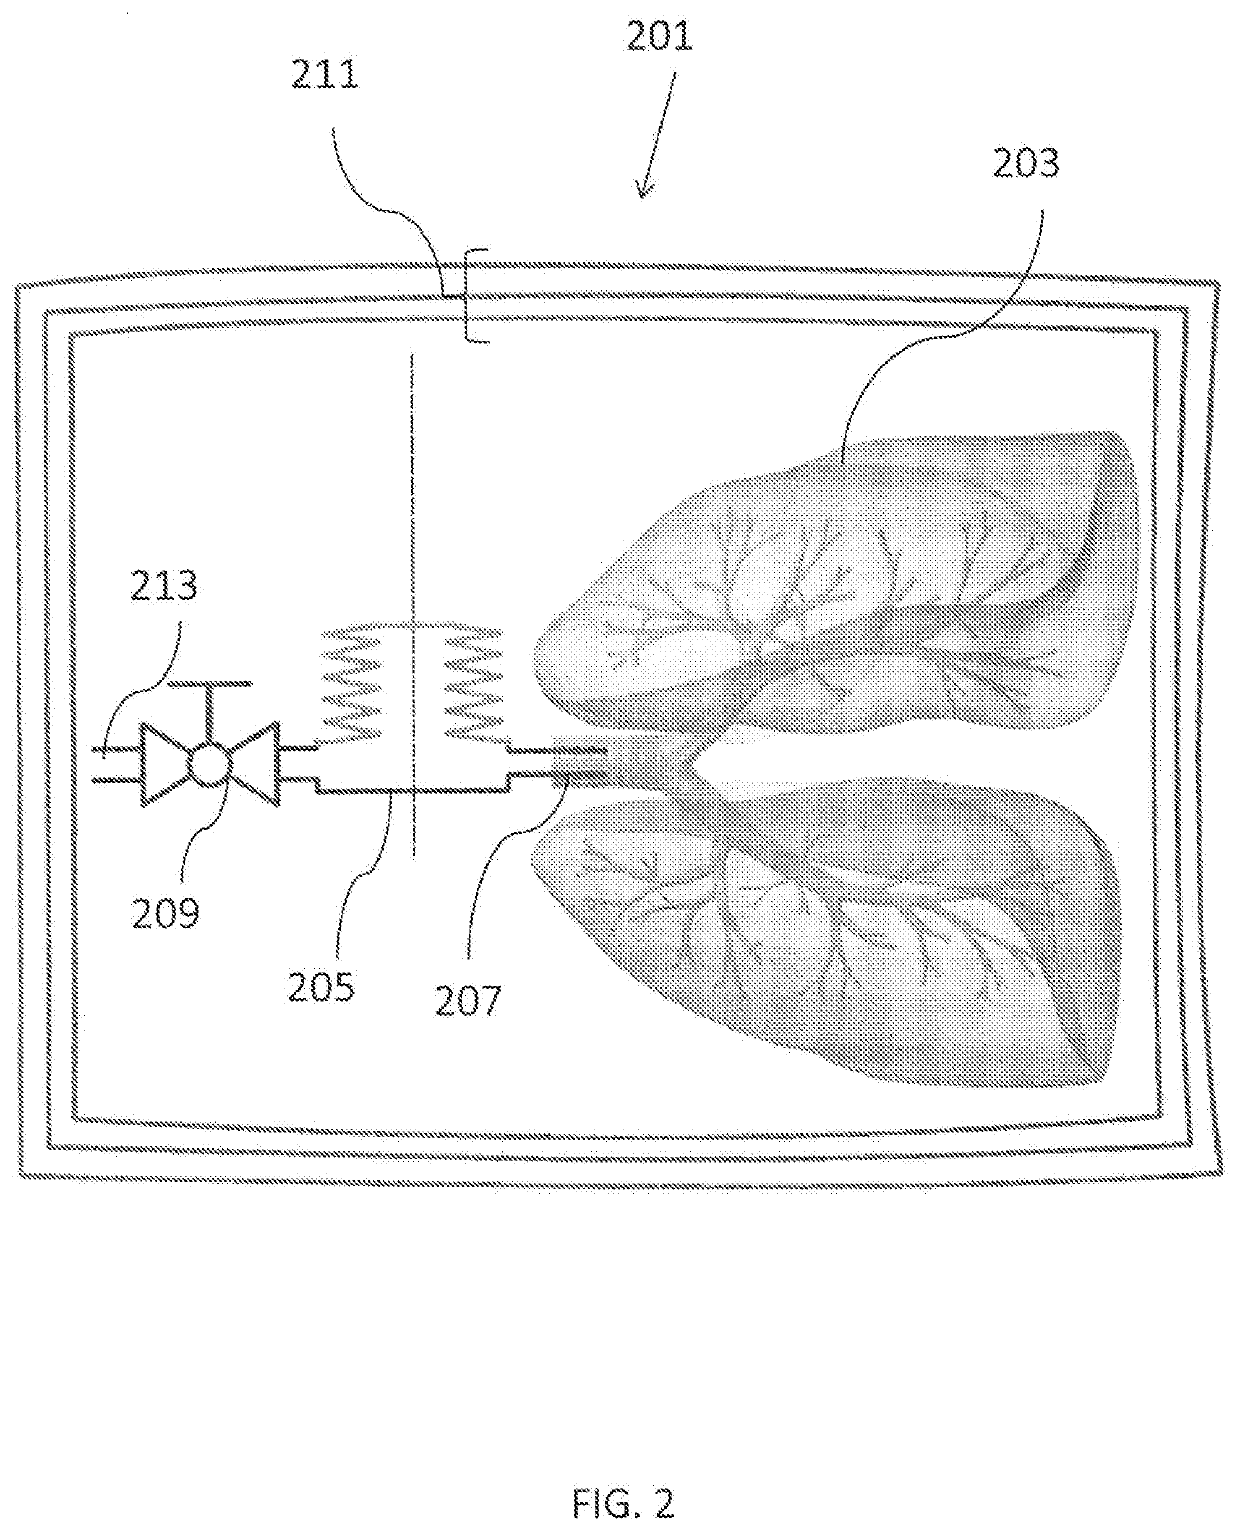 Apparatus for tissue transport and preservation